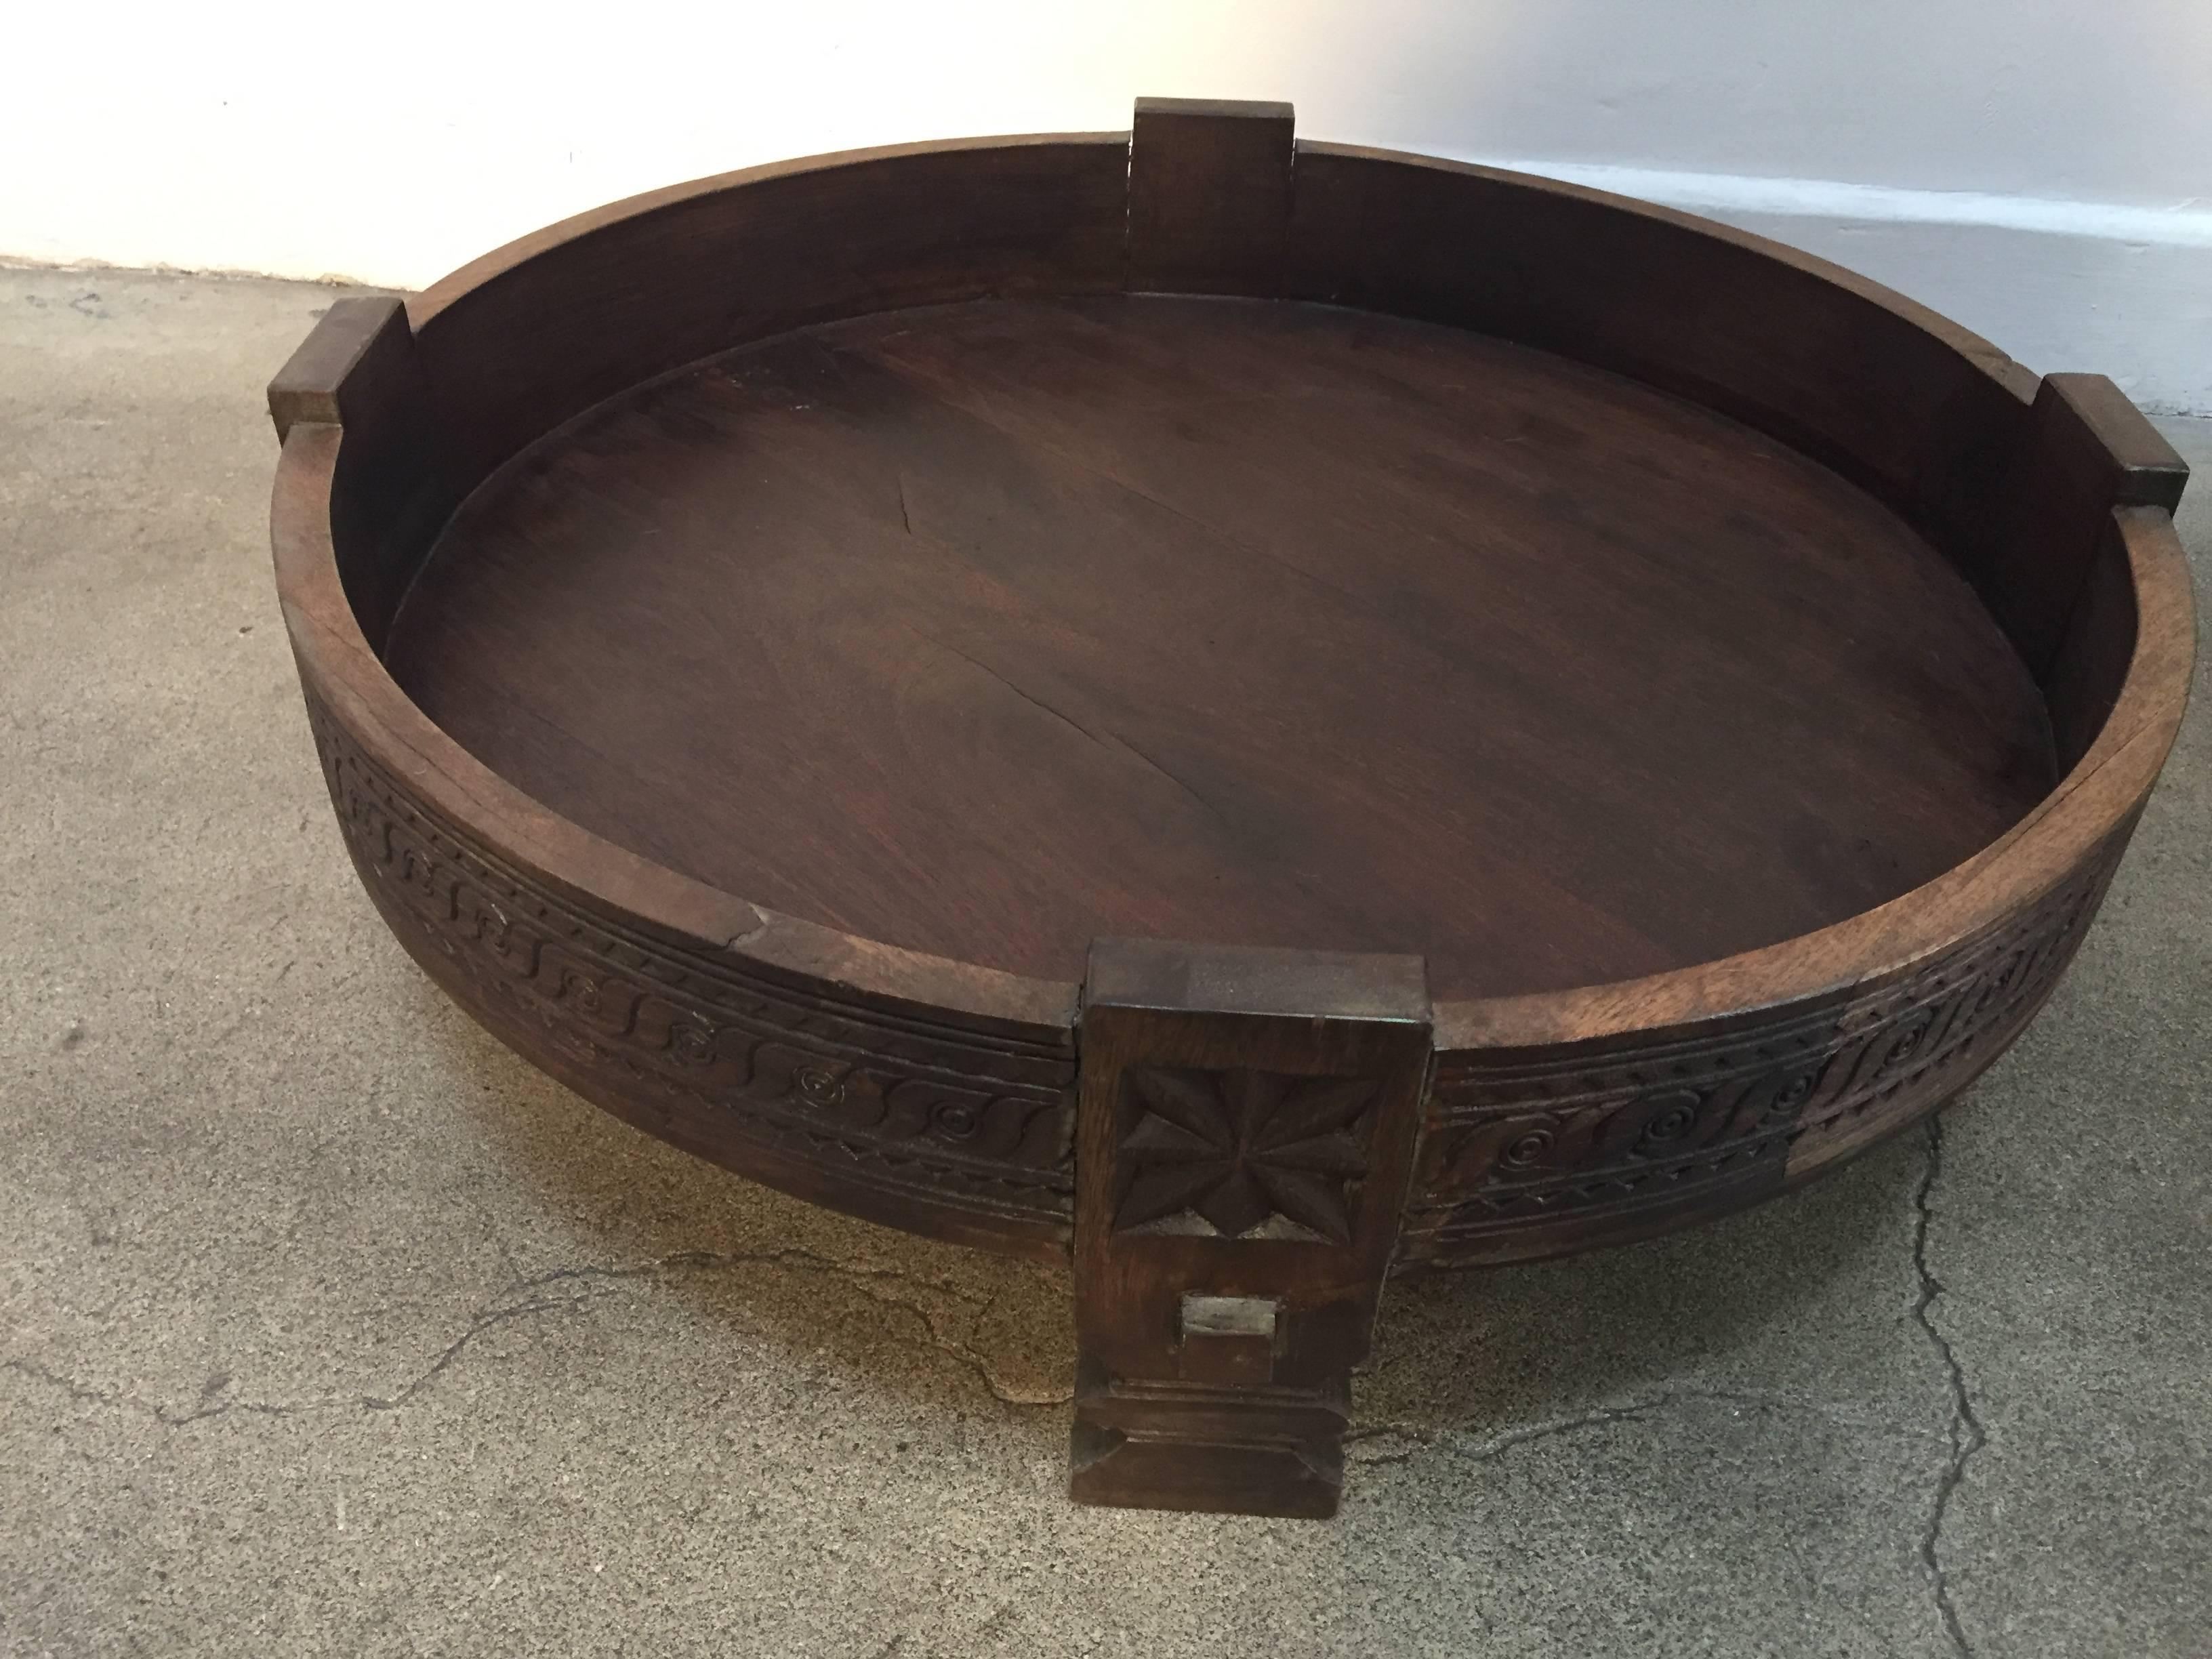 Cowhide Large Round Tribal Low Grinder Table Made into an Ottoman or Pouf